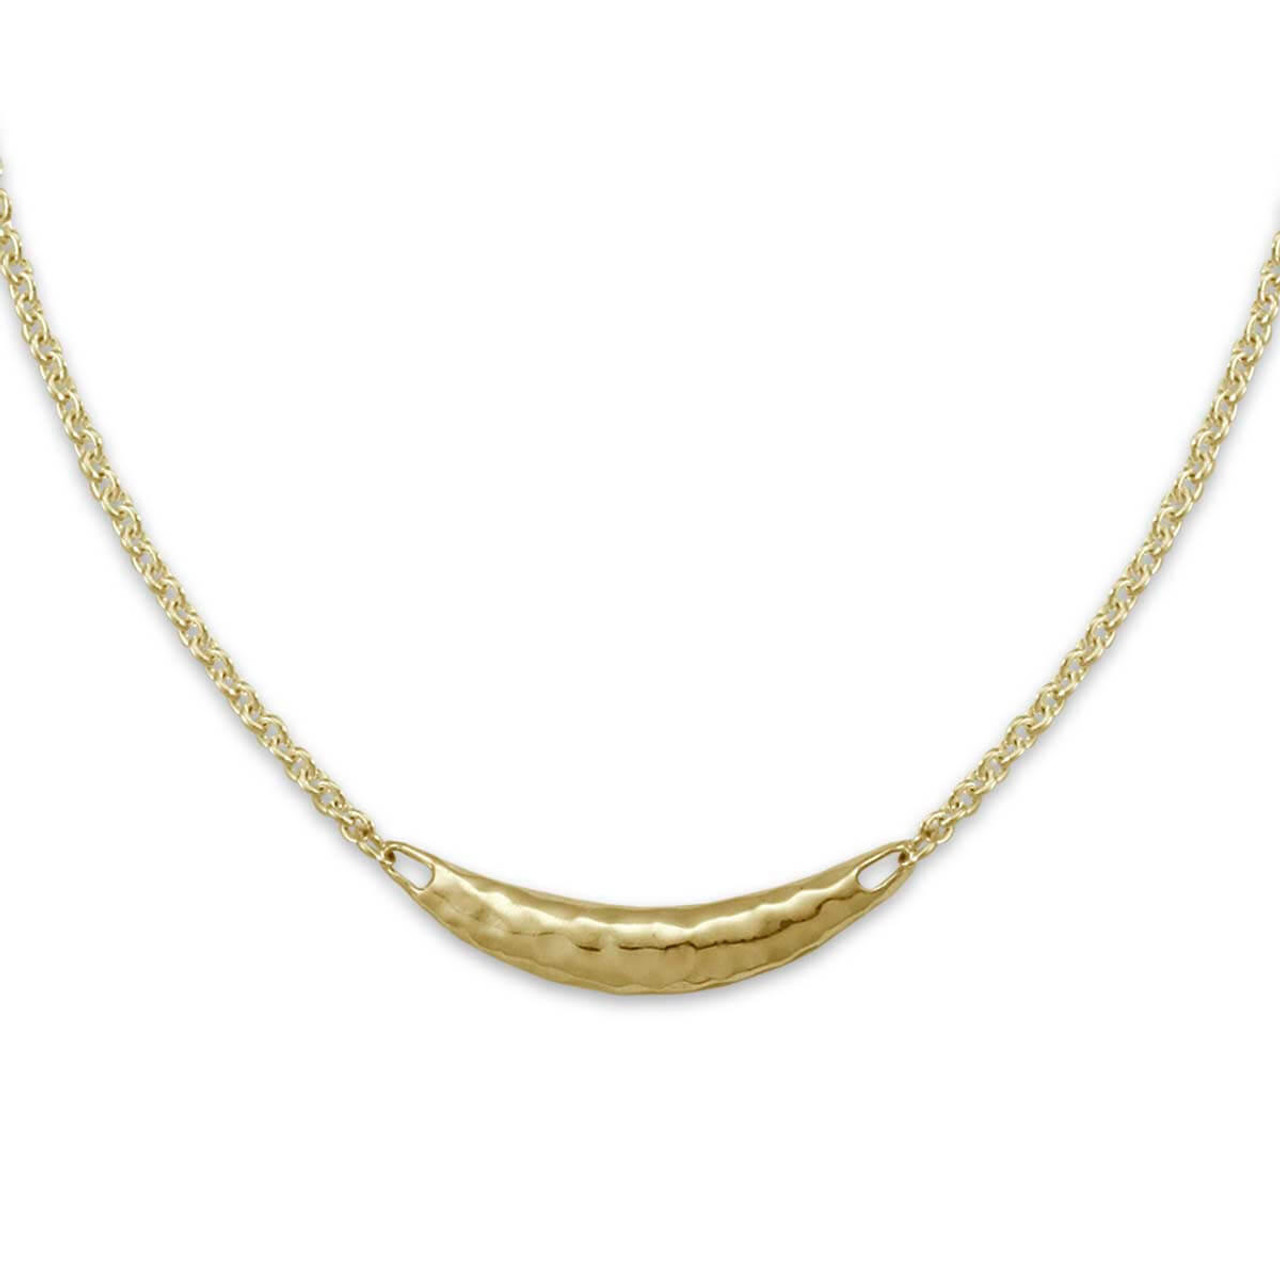 14K Gold Hand Forged Charm Holder Necklace - JH Breakell and Co.